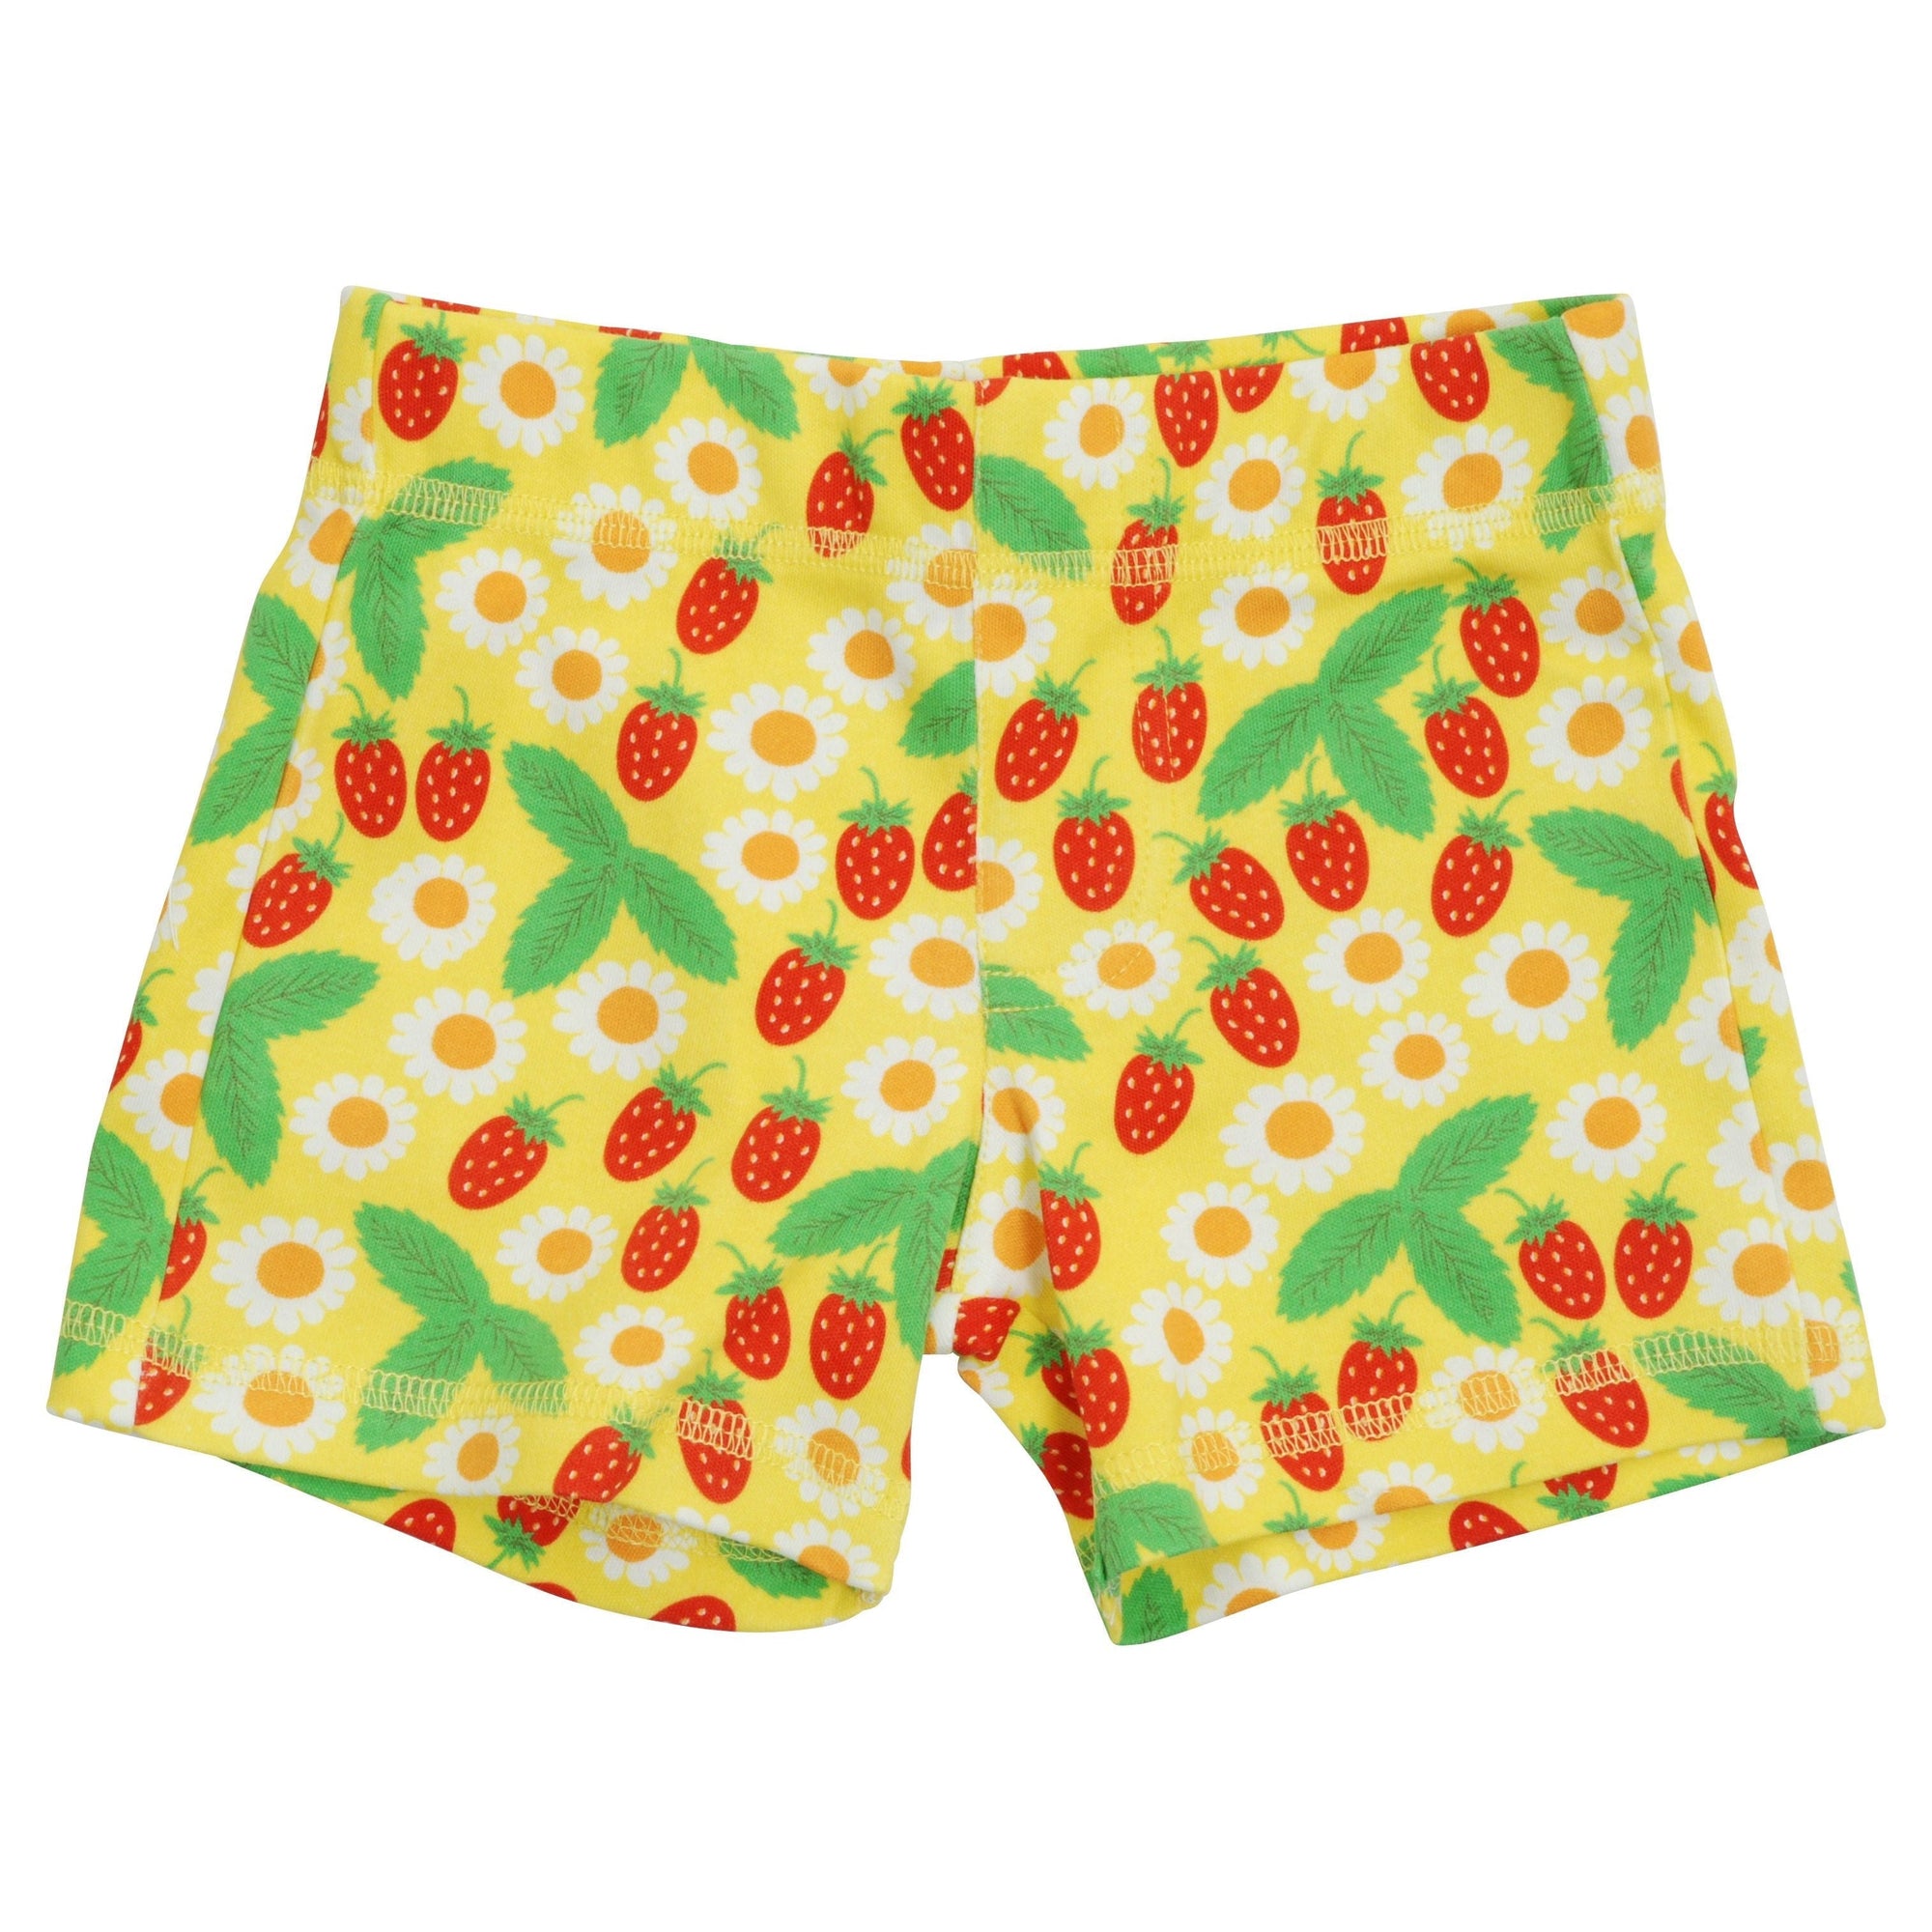 Strawberry - Buttercup Shorts - 2 Left Size 8-10 & 12-14 years-Duns Sweden-Modern Rascals